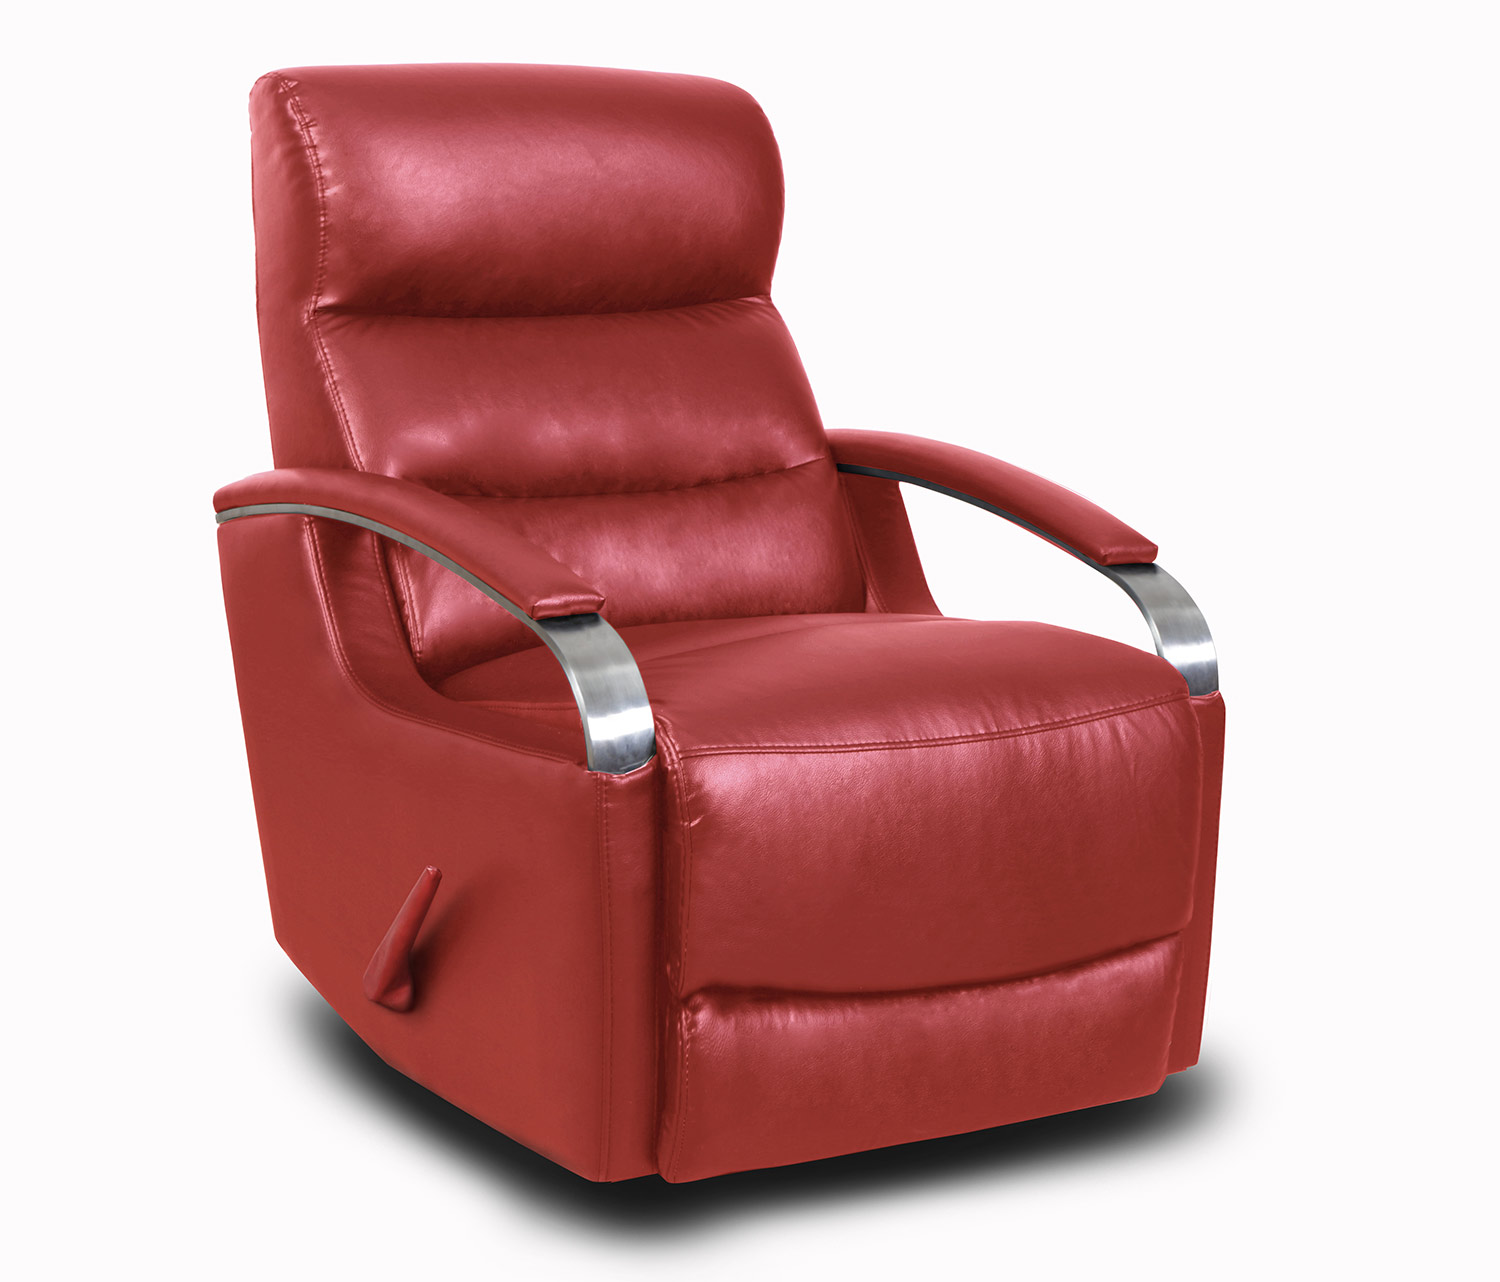 Barcalounger Shadow Swivel Glider Recliner Chair - Contact Red/Leather Match